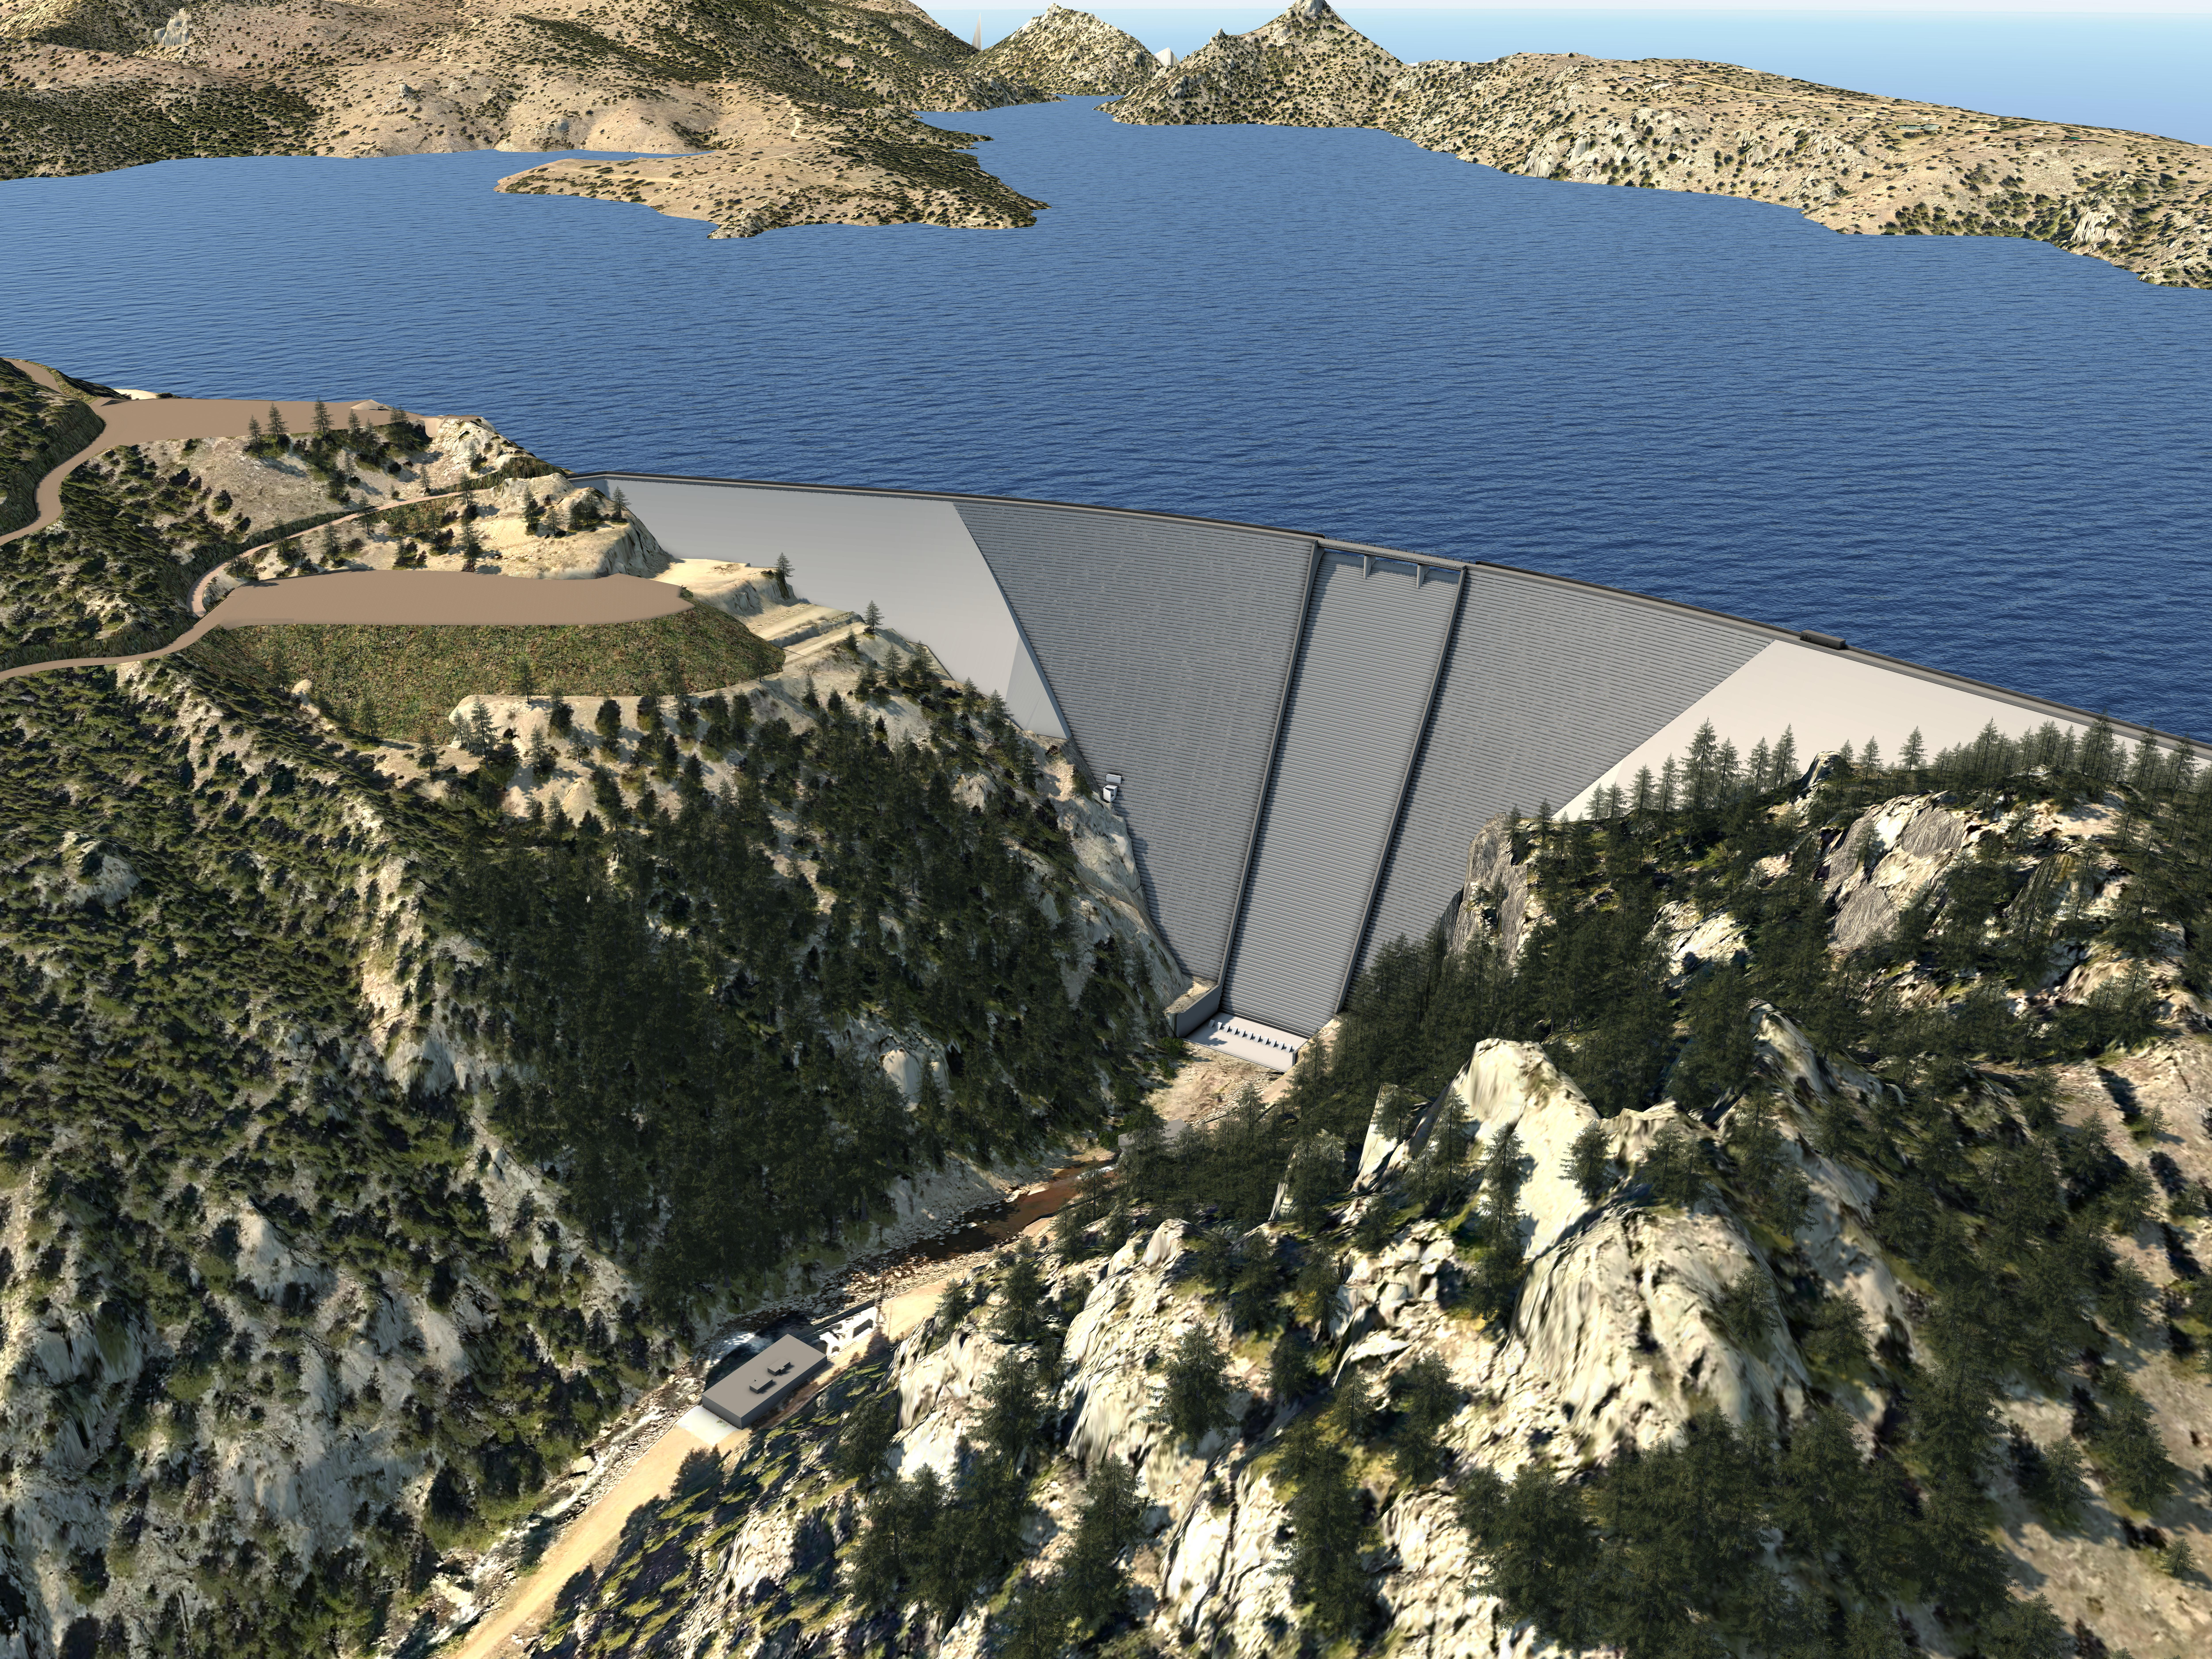 This is a computer image showing a dam in a valley with water behind it in a reservoir.